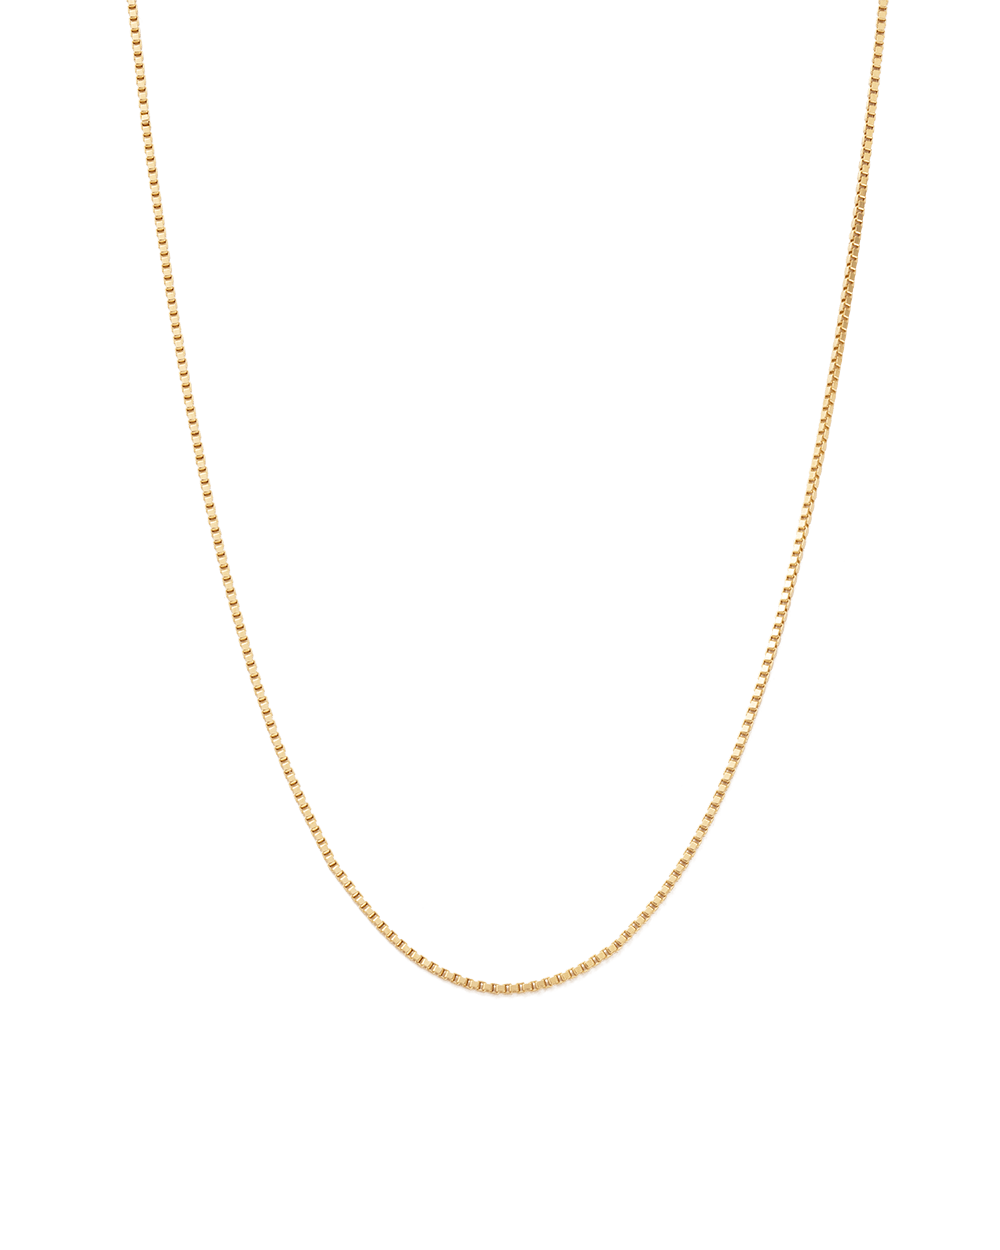 INTERTWINE CHAIN NECKLACE (18K GOLD PLATED) - IMAGE 1